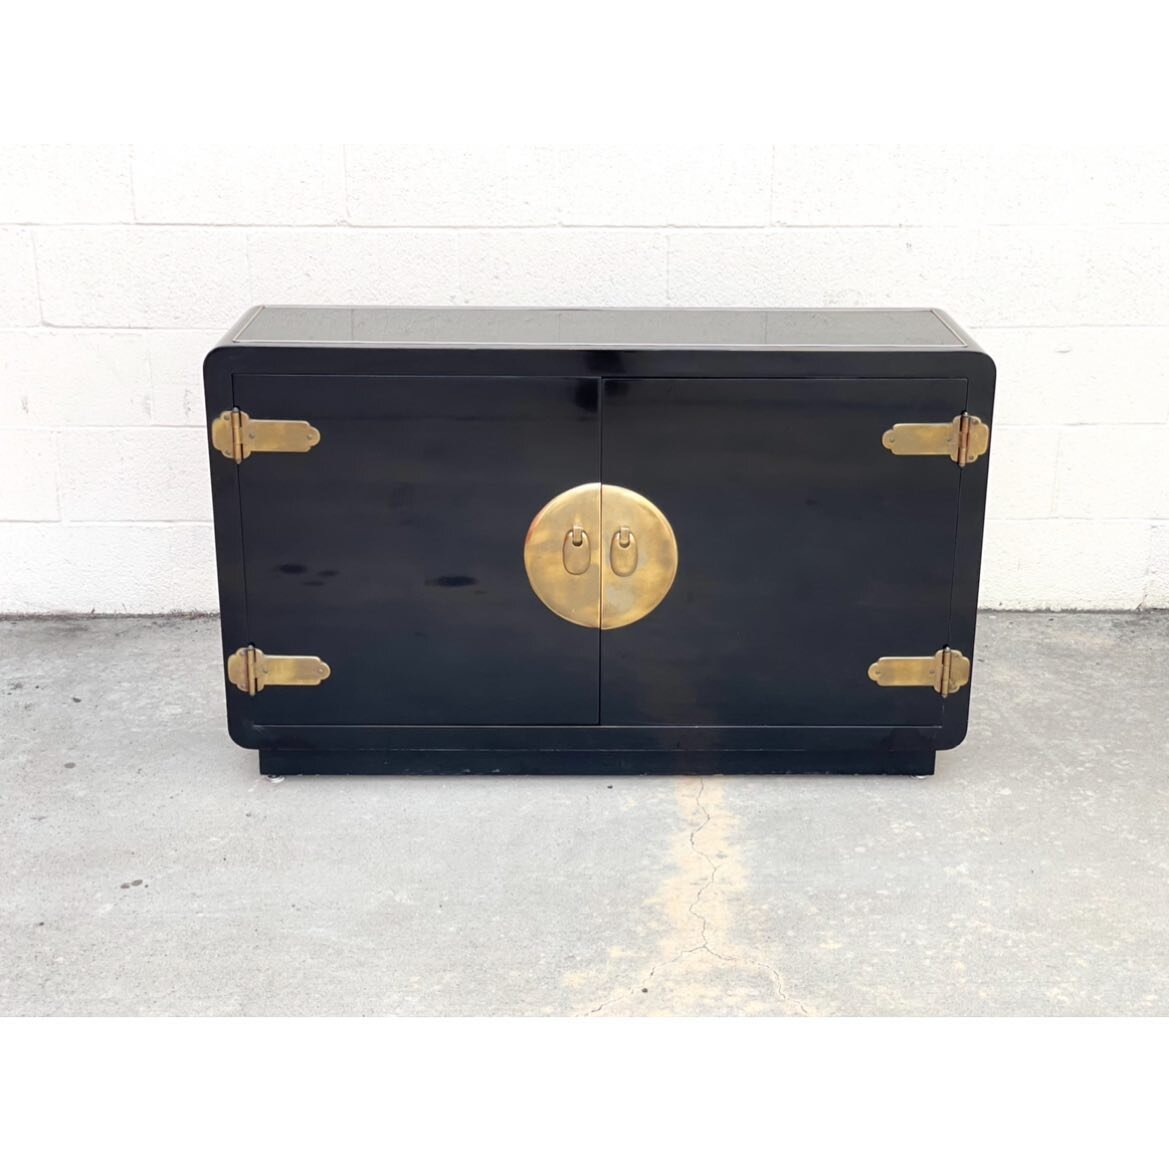 A Mastercraft Credenza in Black Lacquer and Brass
$995
.
.
.
#mastercraft #brass #blacklacquer #interiordesign #interiors #interiordecor #collectibledesign #interiordecorator #asianstyle #japanesefurniture #japanesestyle #chinesestyle